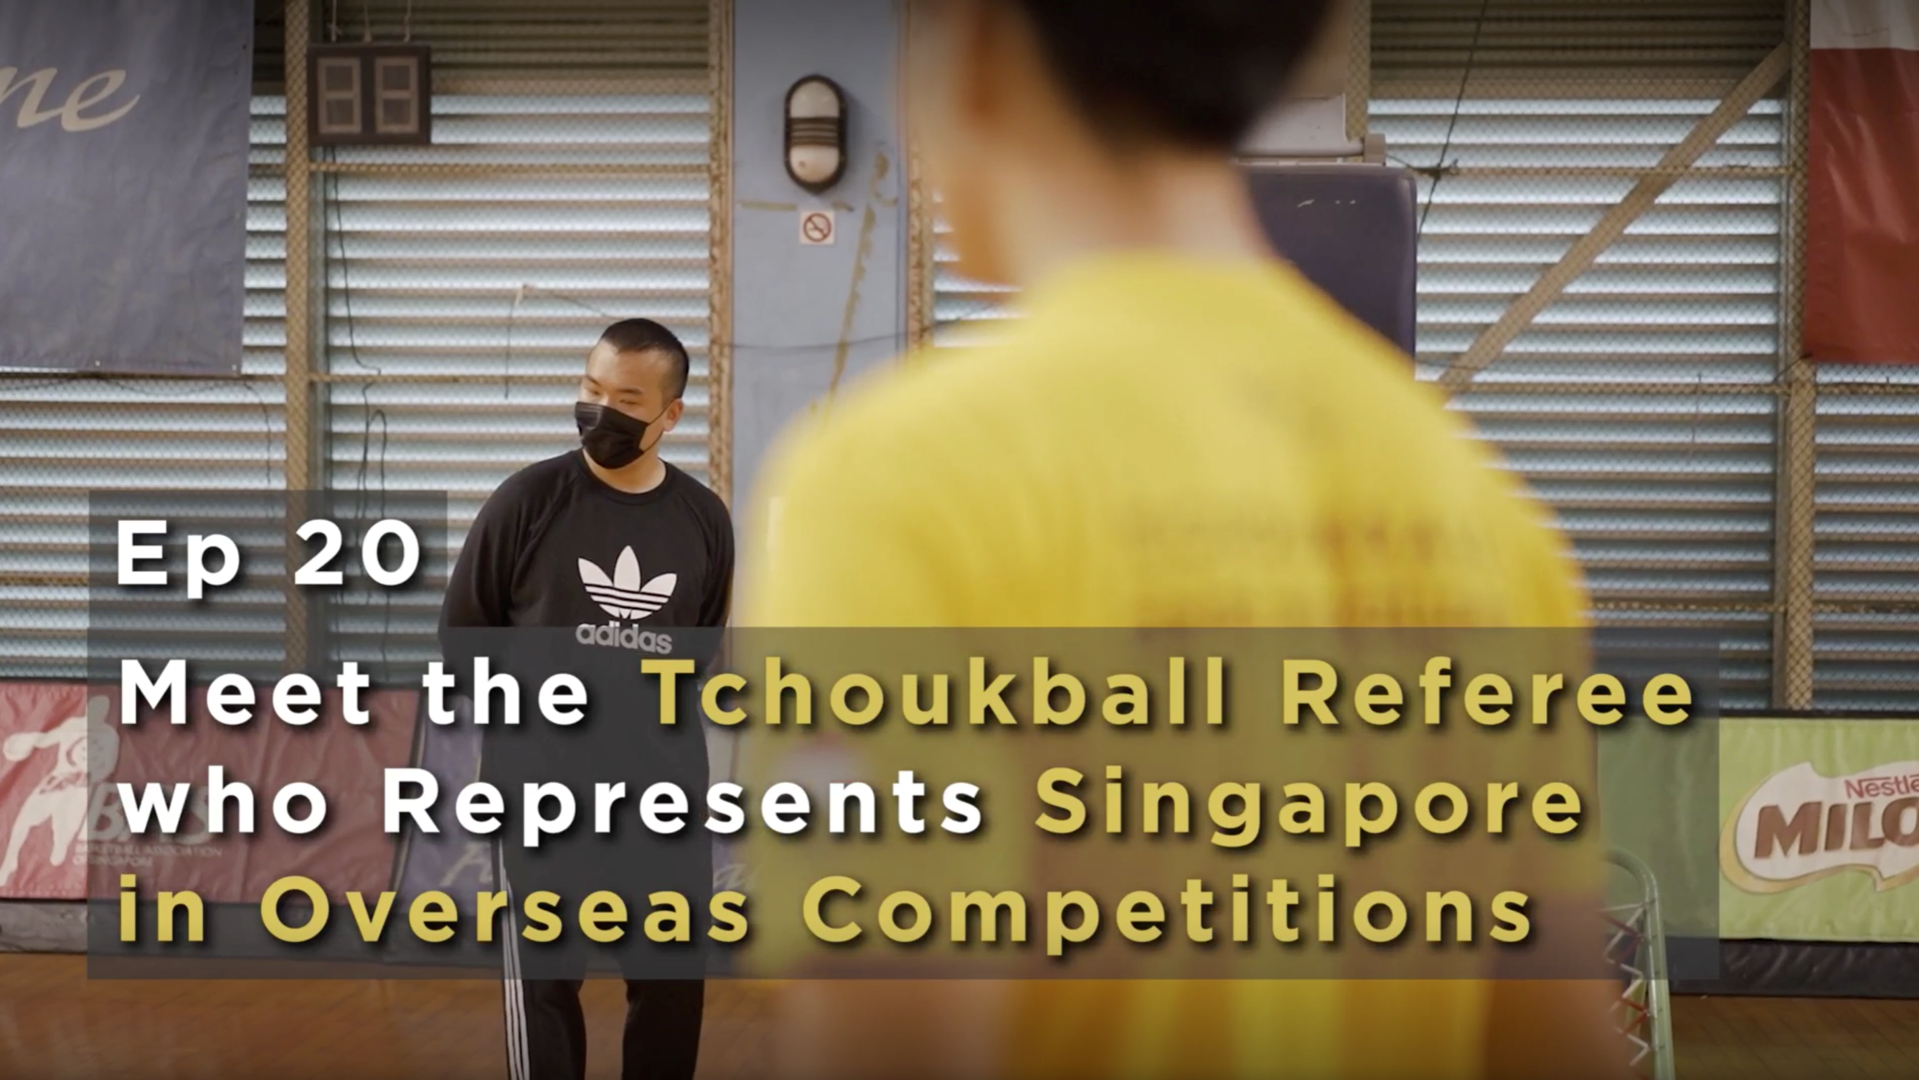 Ep 20 - Meet the Tchoukball Referee who Represents Singapore in Overseas Competitions